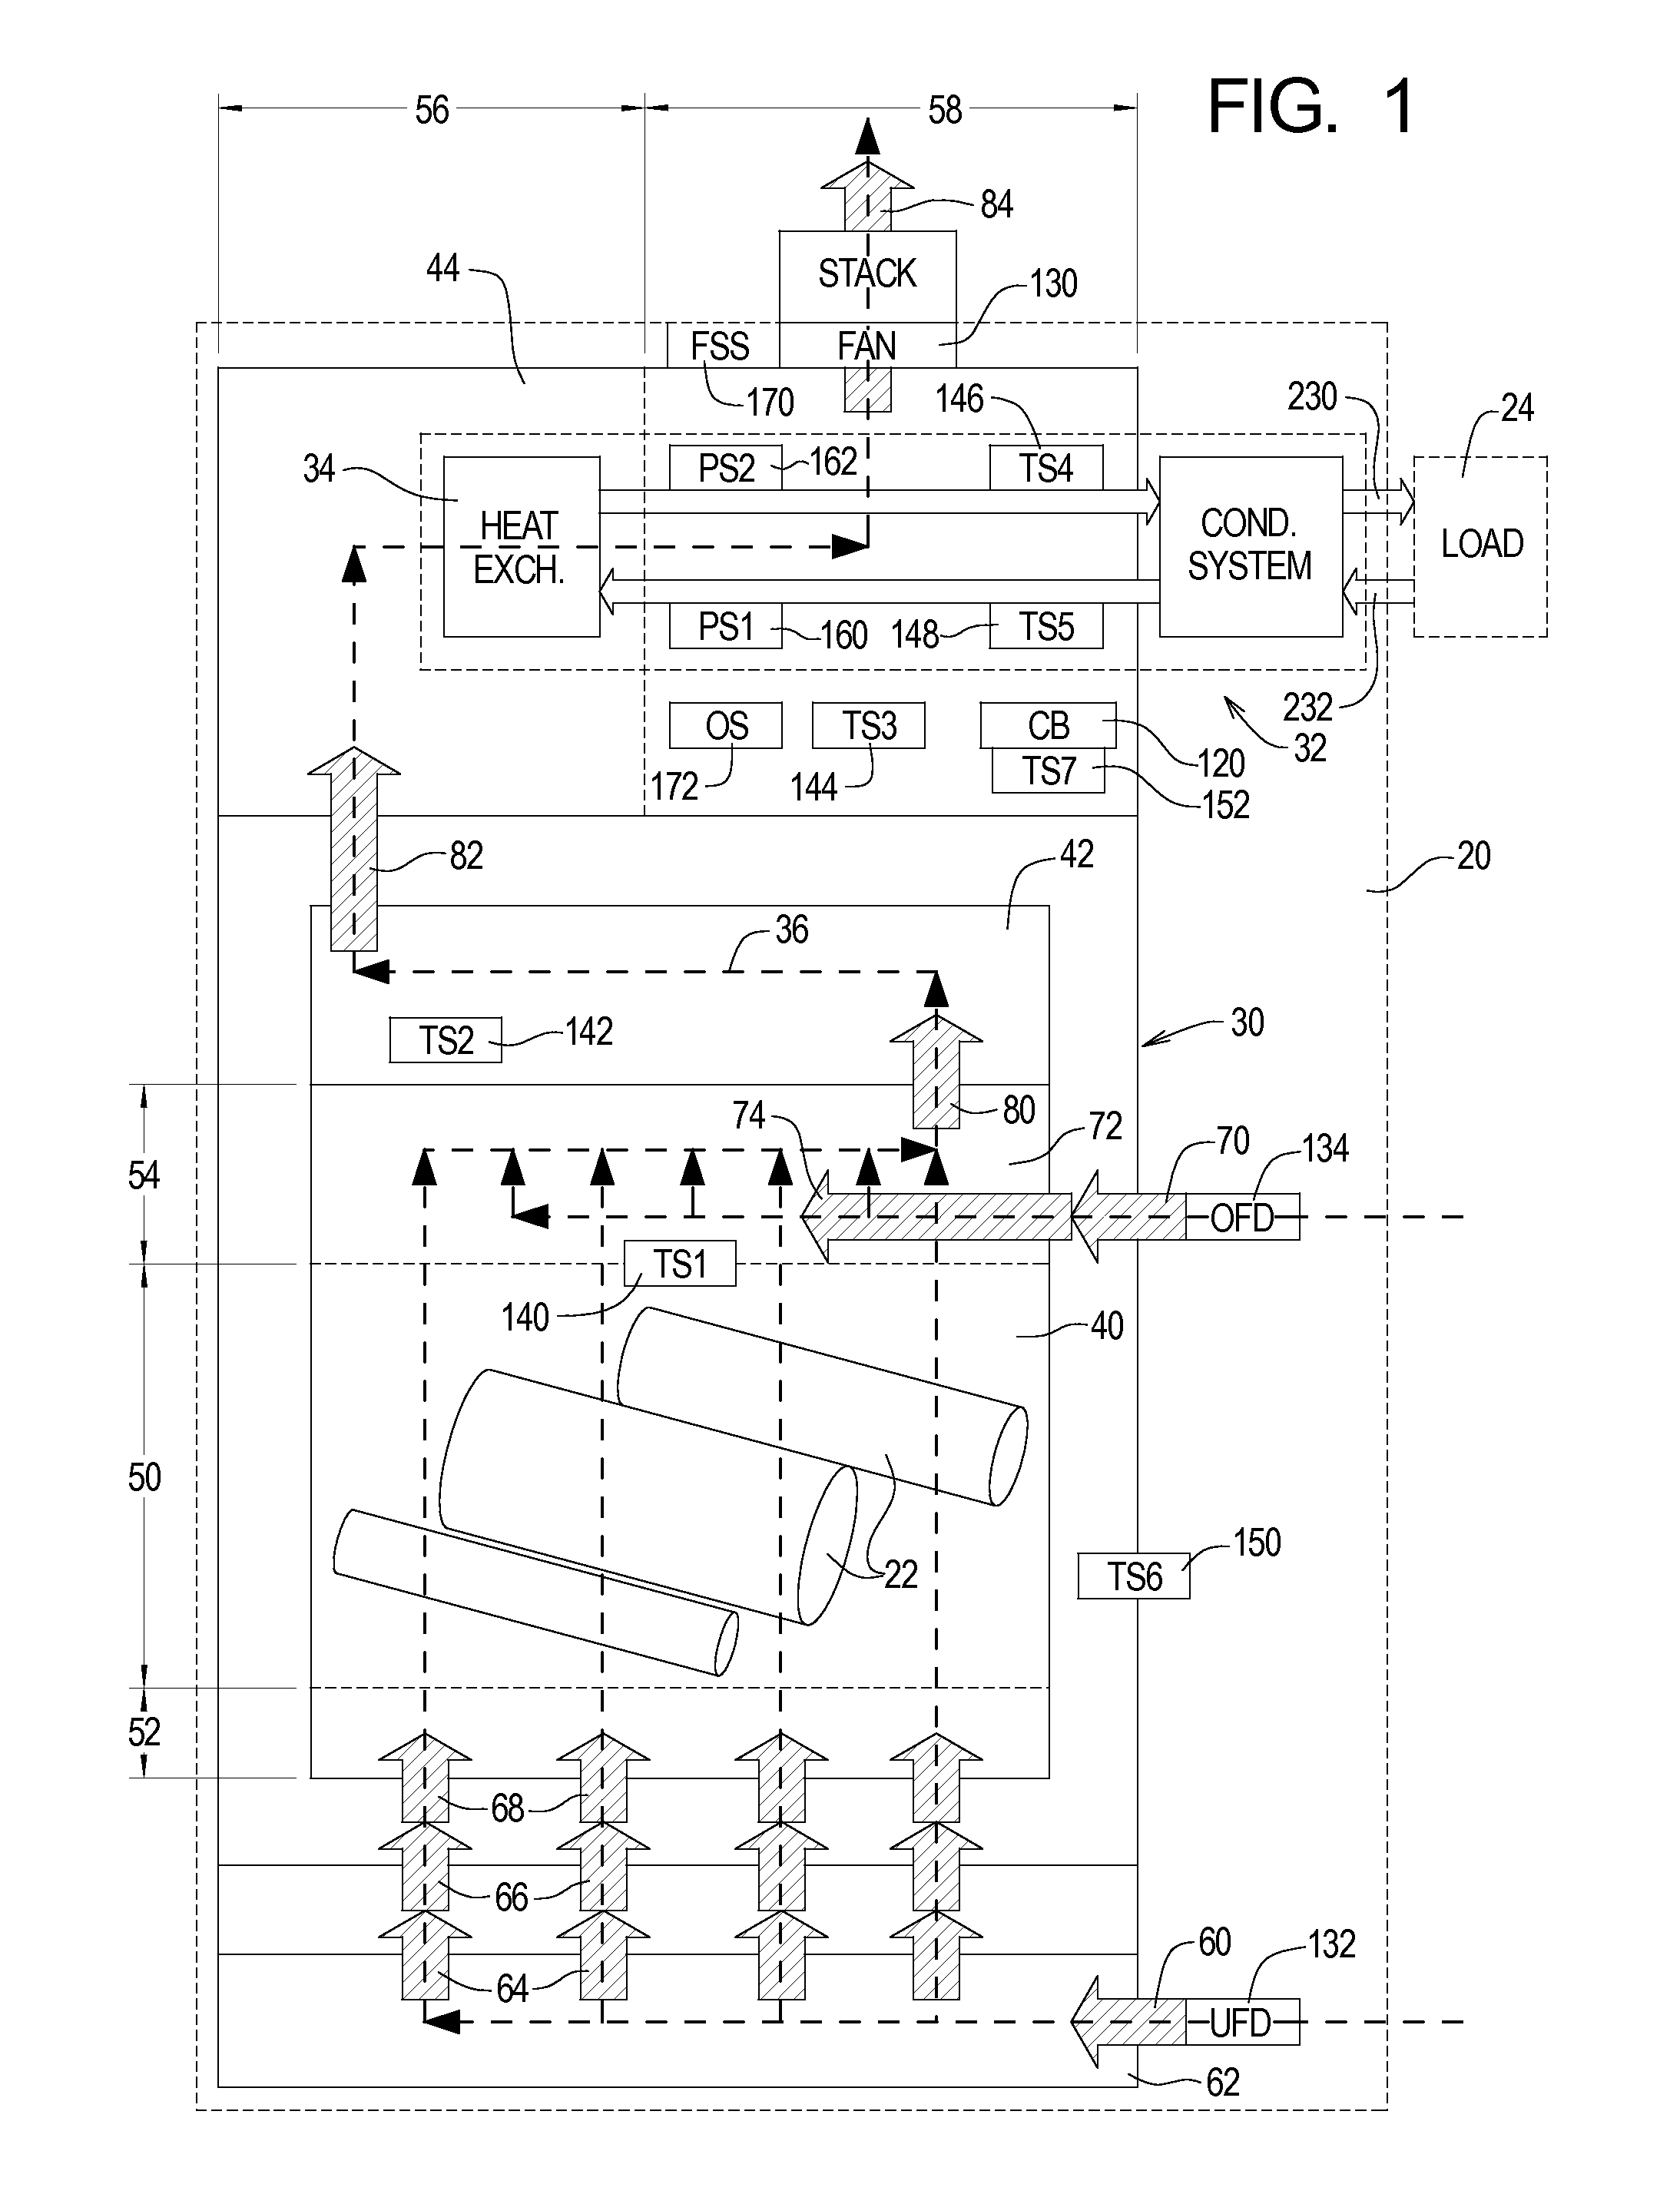 Systems and methods for heating water using biofuel